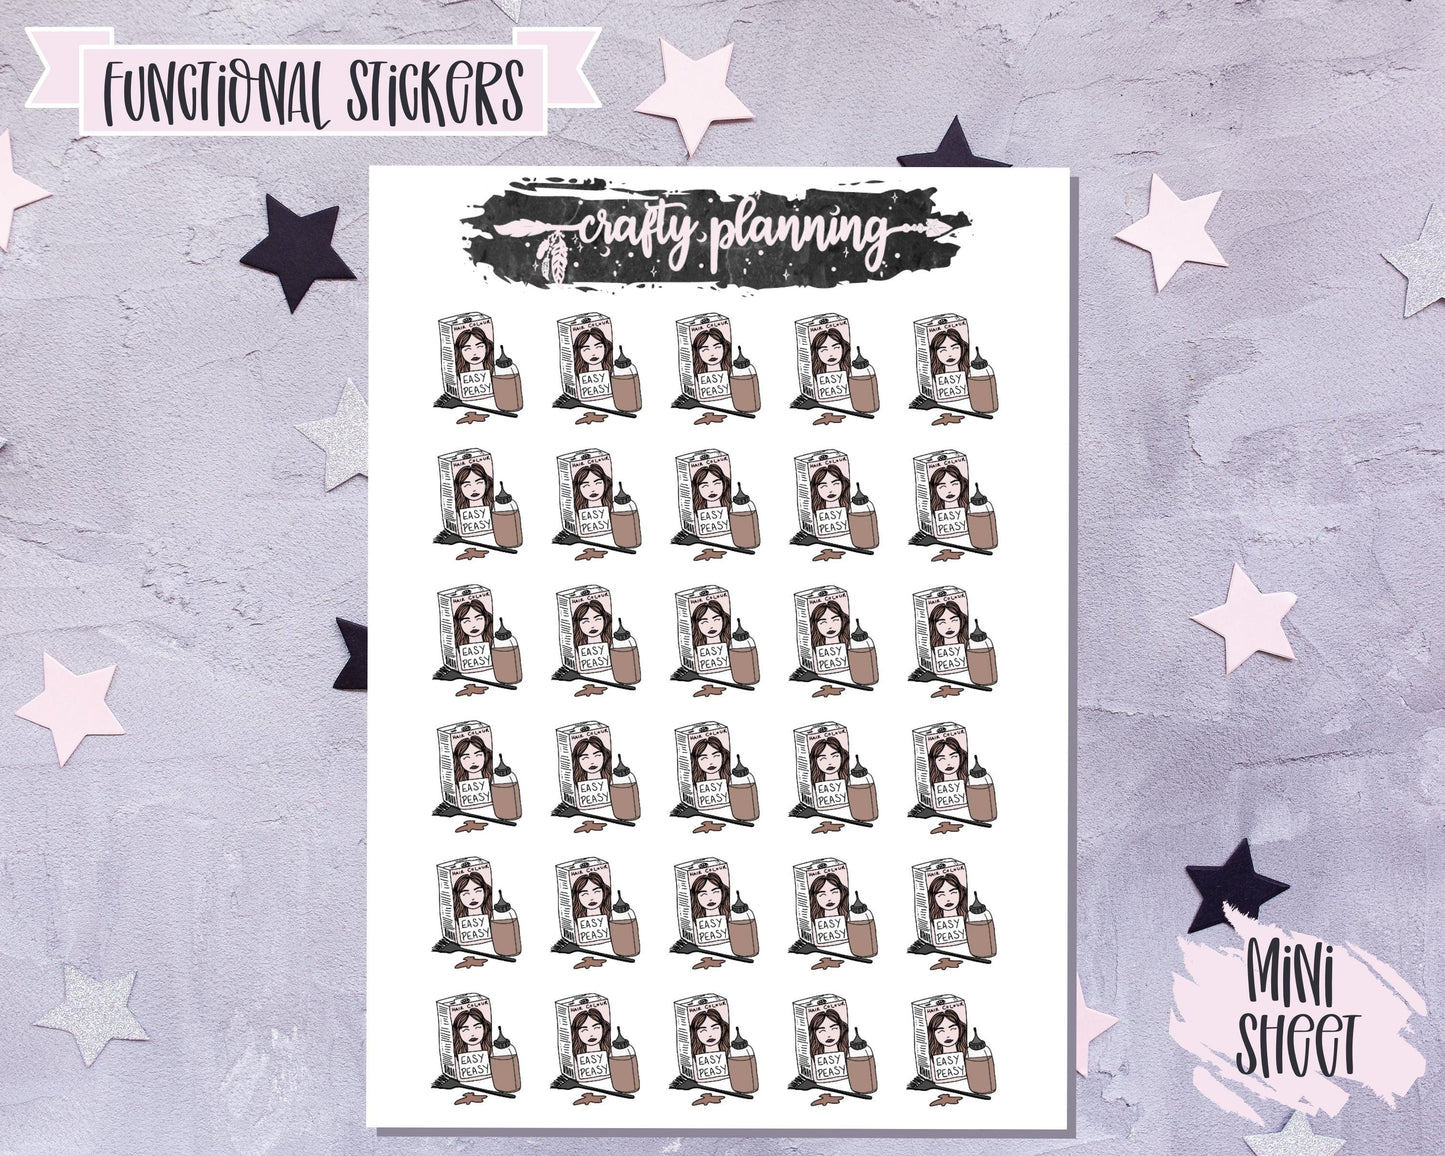 Hair Stickers, Hair Dye, Planner Stickers, Self Care Stickers, Beauty Stickers, Hairdresser Stickers, Functional Stickers